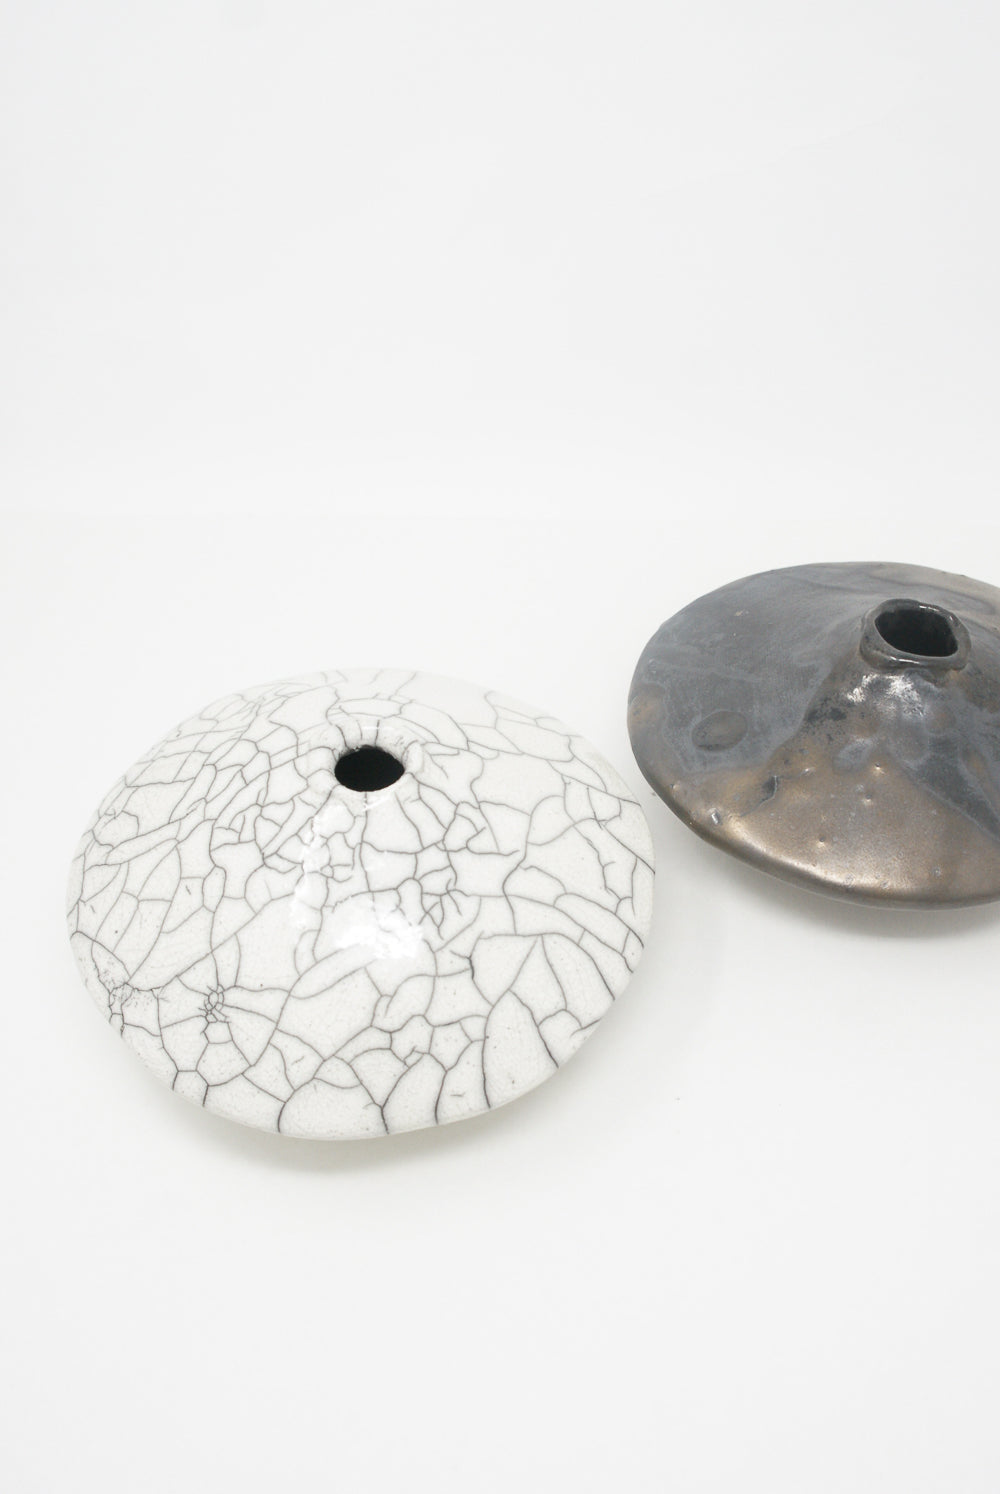 Two Ikebana Vases in Raku-Fired Stoneware with knob tops on a white background, one with a crackled glaze finish, the other with a glossy dark glaze by MONDAYS.